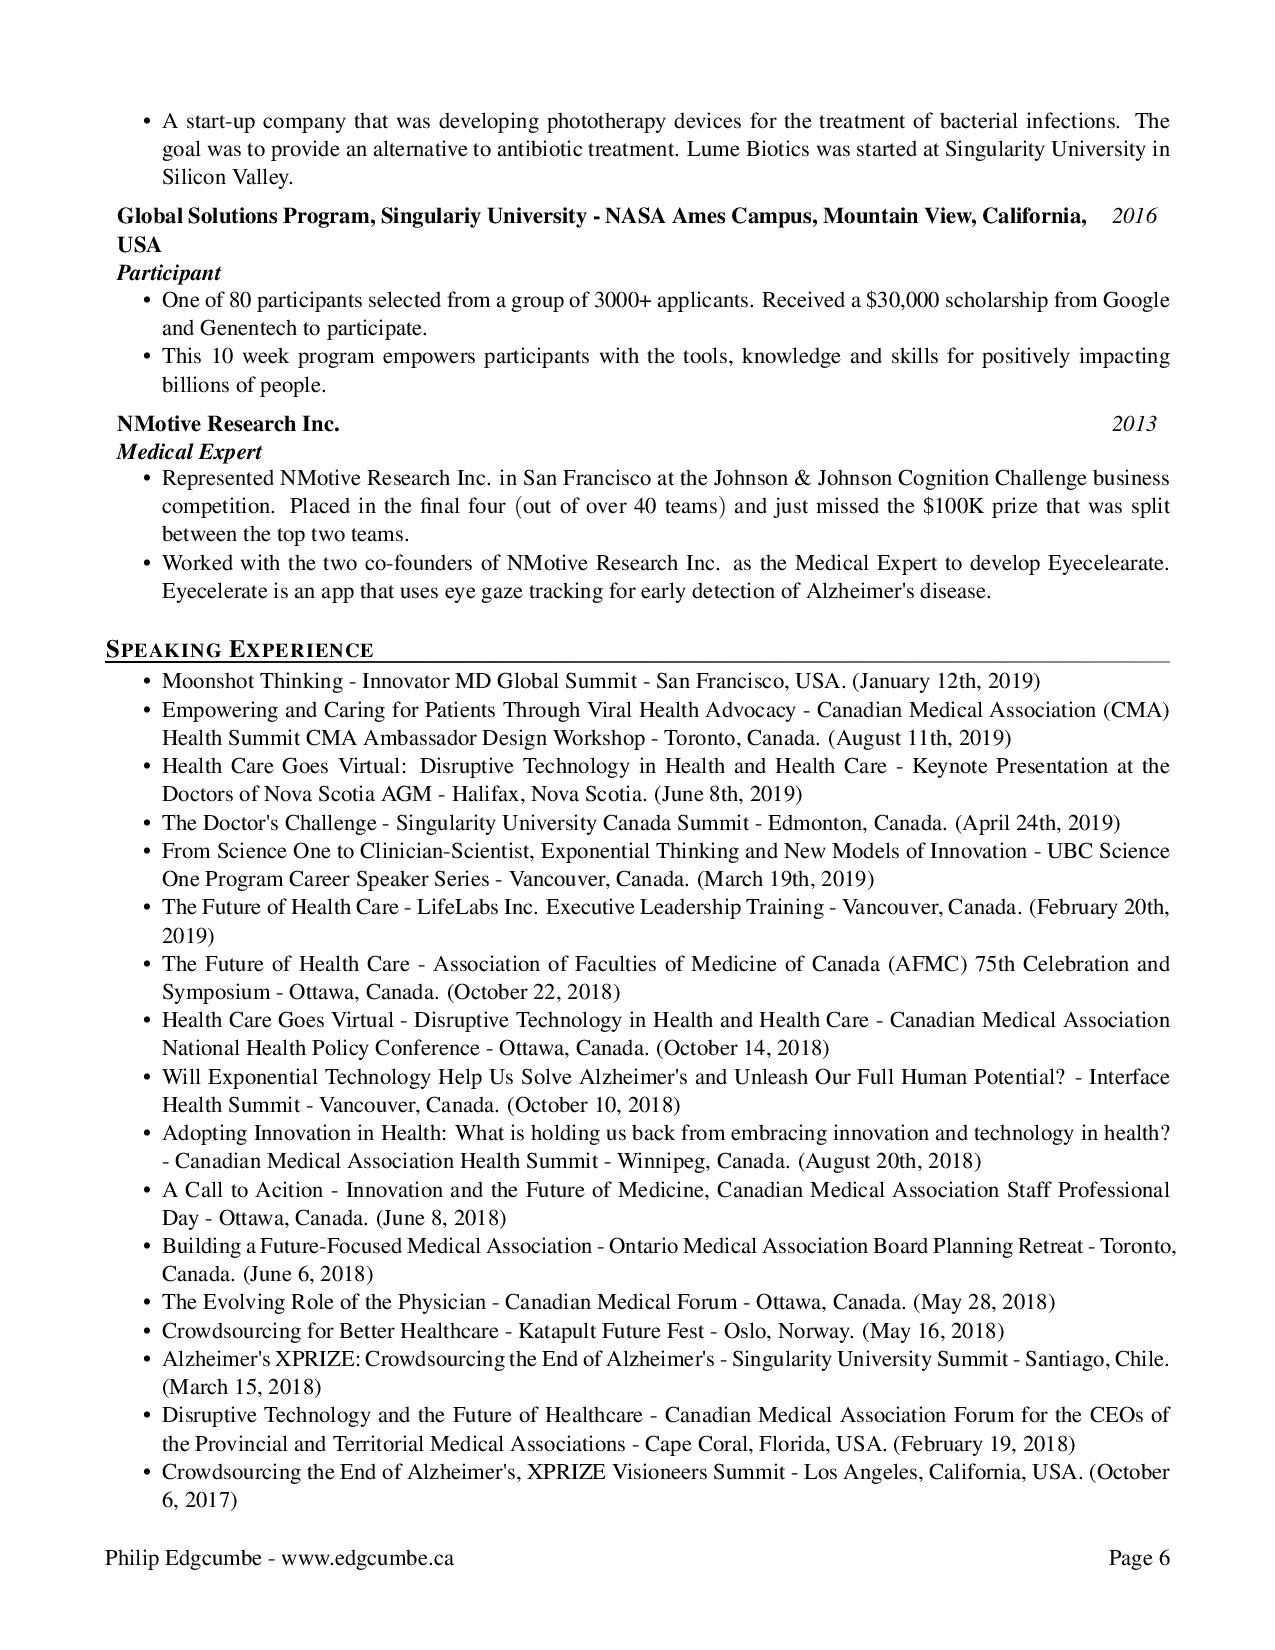 November-2020-Philip-Edgcumbe-Resume-8-pages-page-006